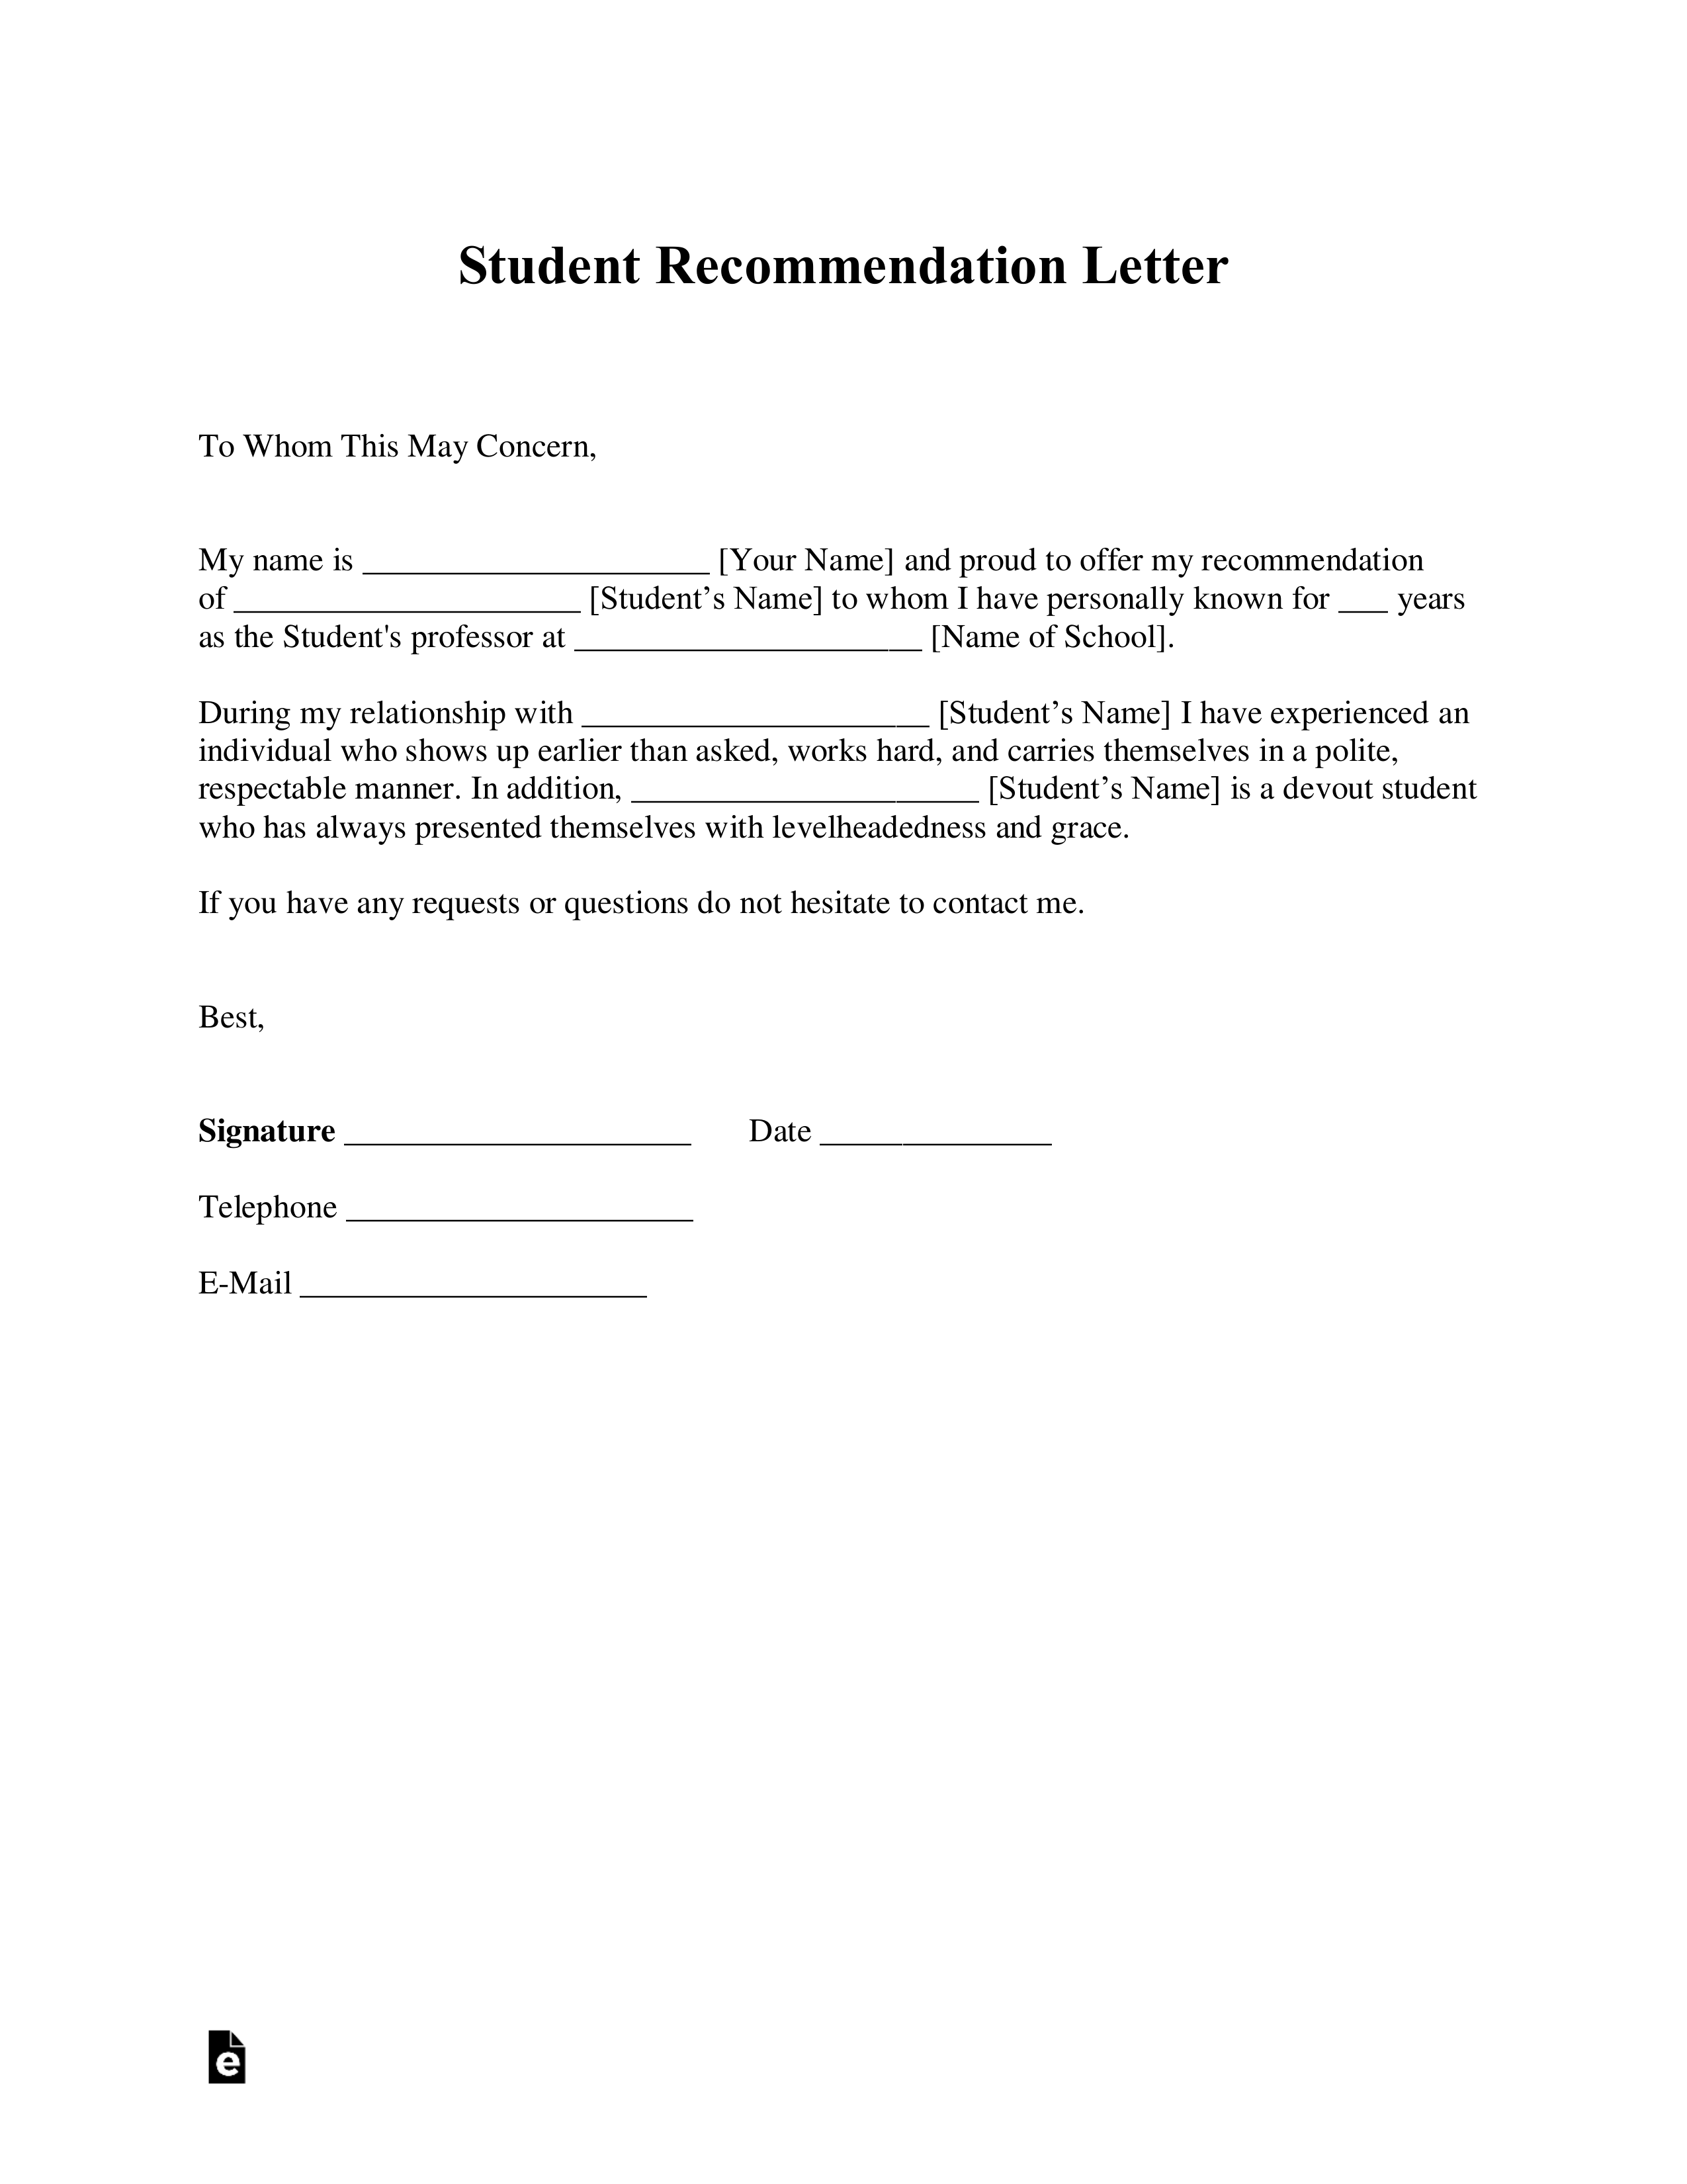 Sample Recommendation Letter For Admission To Graduate School